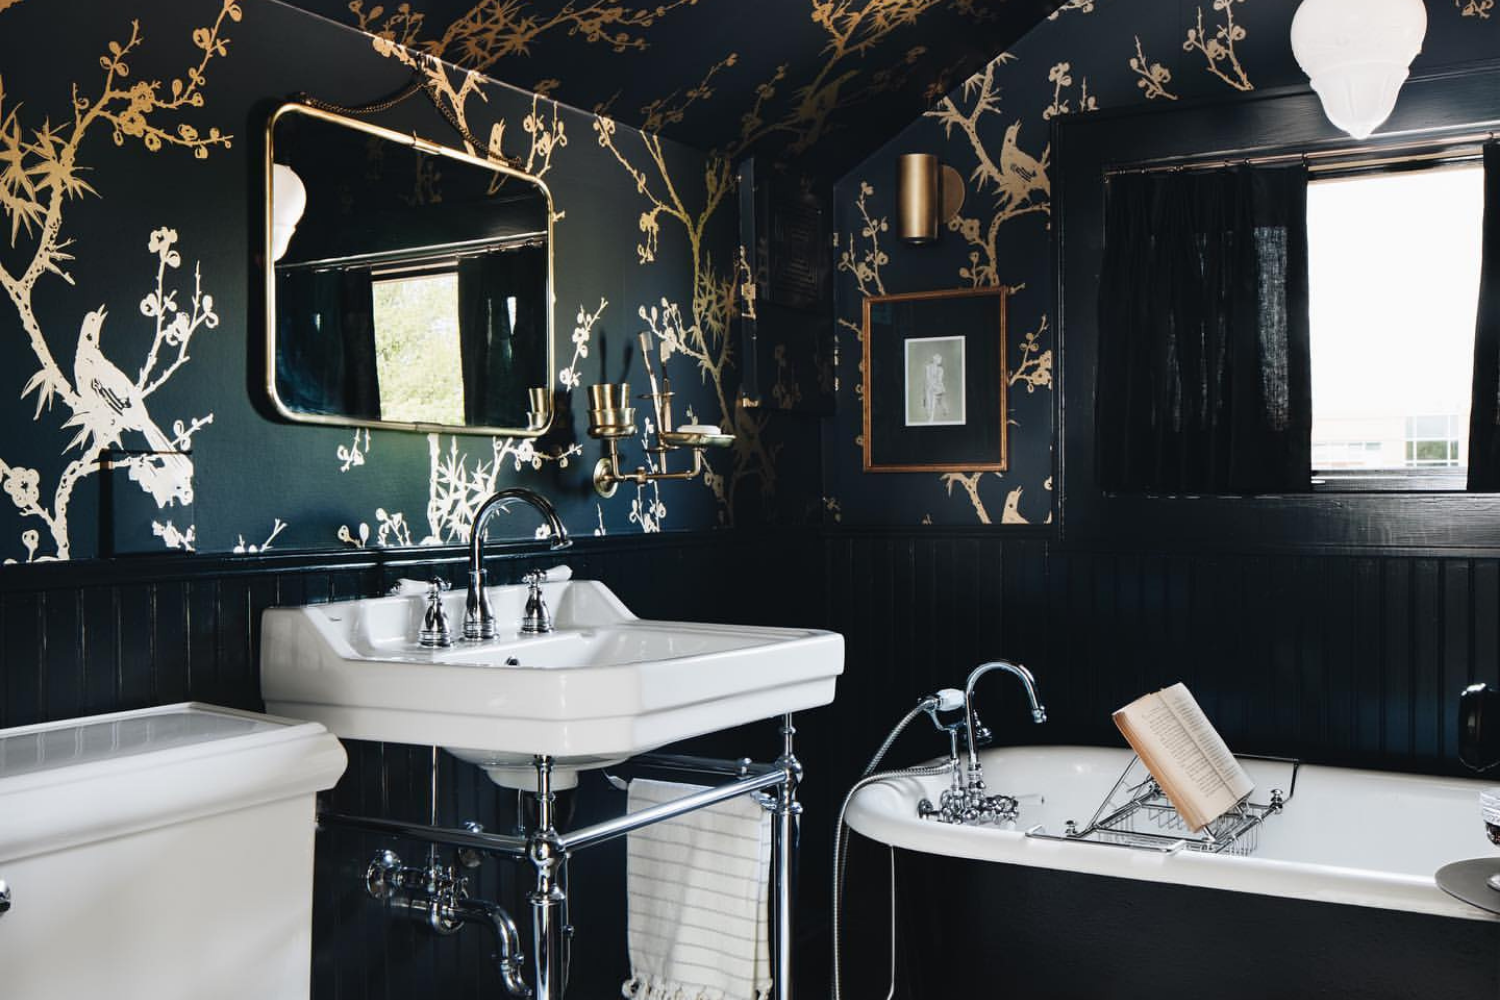 25 Small Chic Bathroom Ideas That Look Luxurious- Little Touches Open Up Bathrooms Short on Space